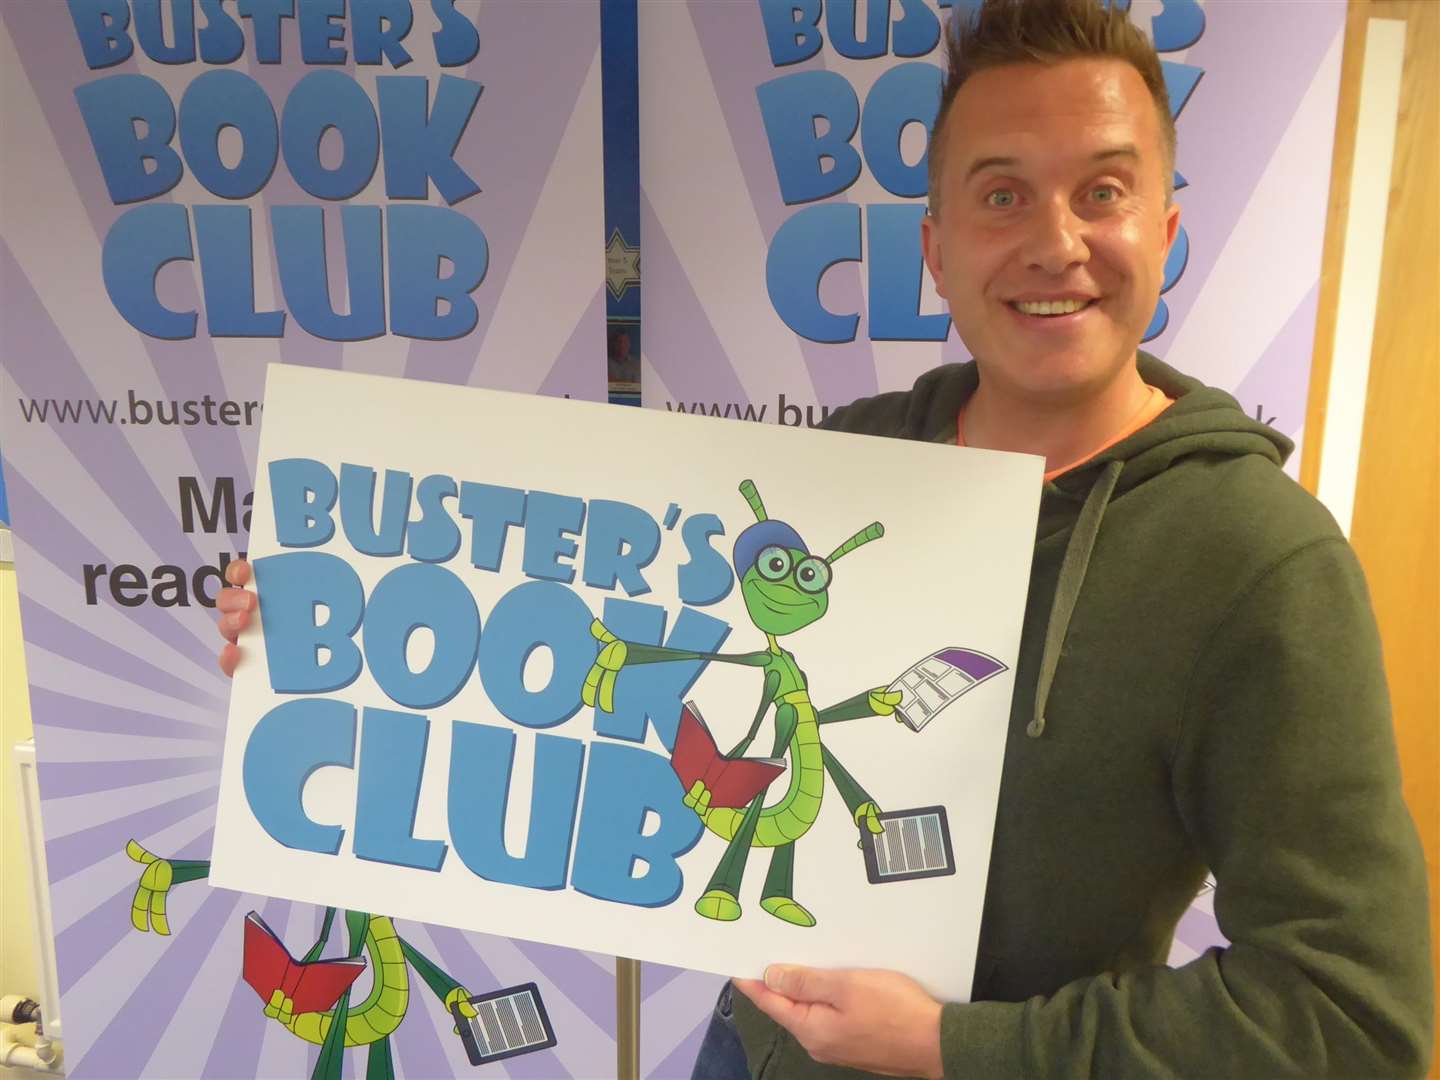 Phil Gallagher, as seen on CBeebies' Mister Maker, supports the Buster's Book Club reading reward scheme. (4325161)